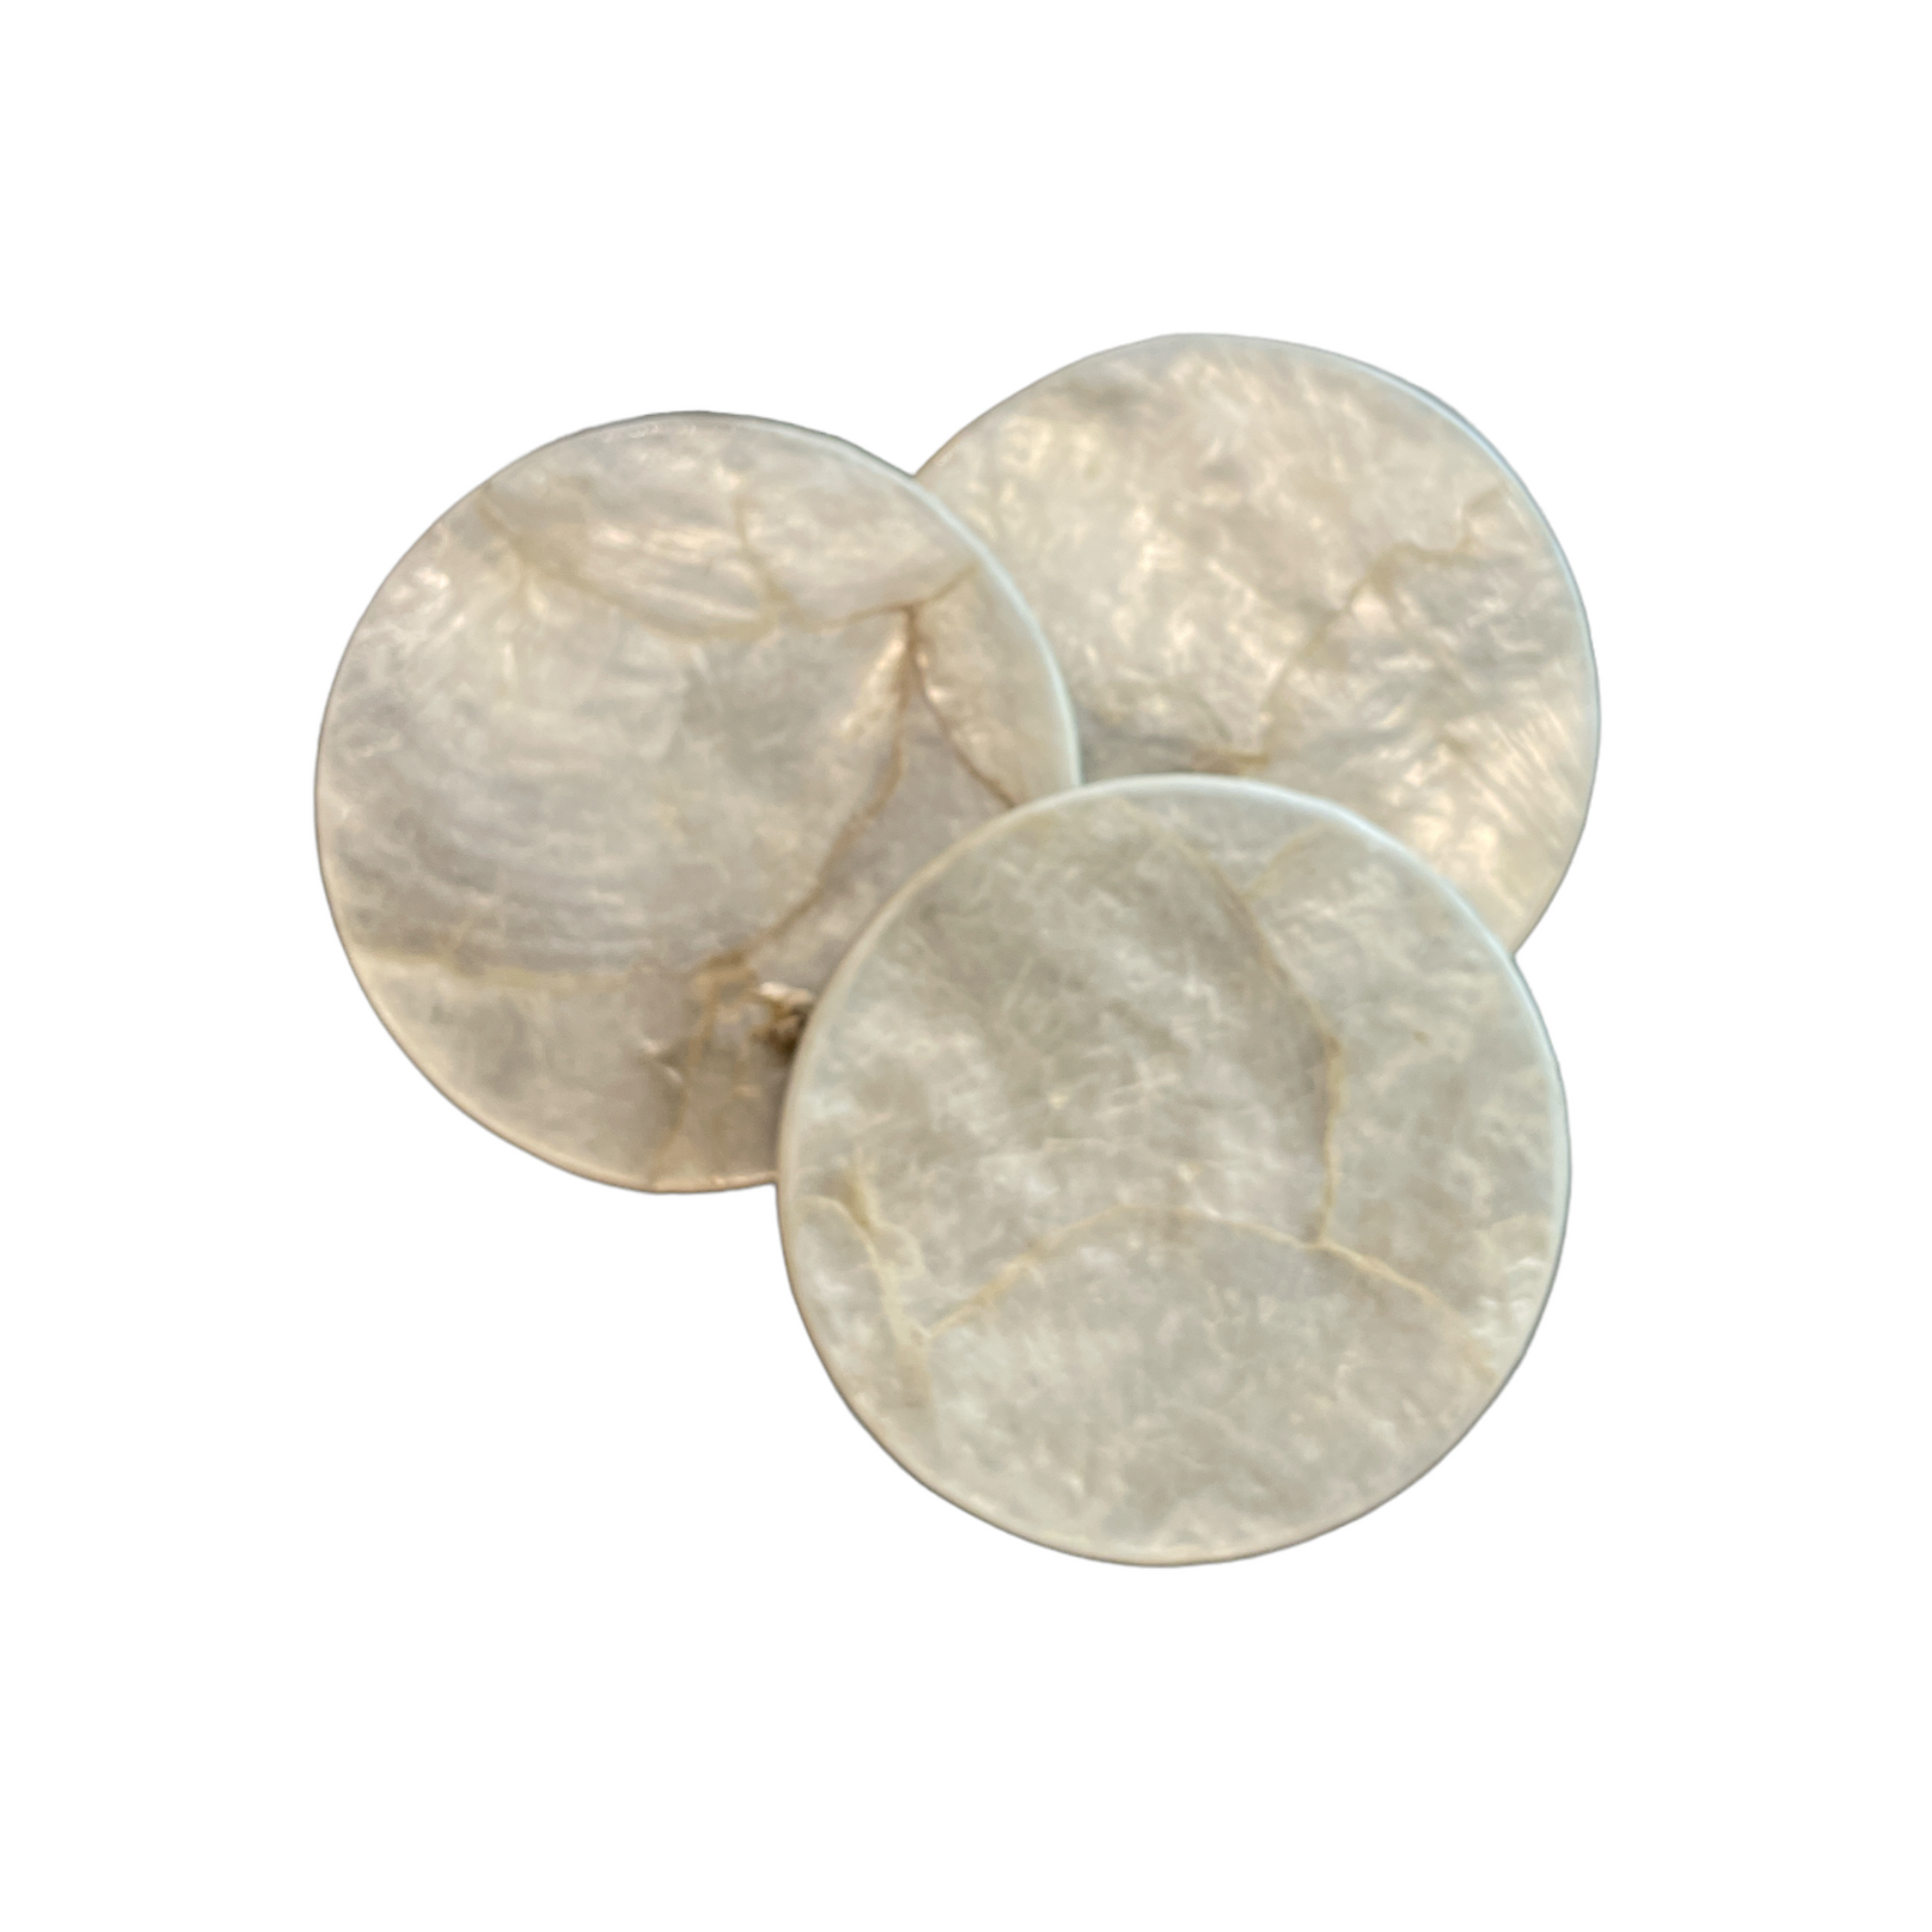 This beautiful Reversible Capiz Coaster will make your guests fall in love with your table setting and truly enhance the dining experience. Reverse the coaster for white or dark grey colour options. Three.